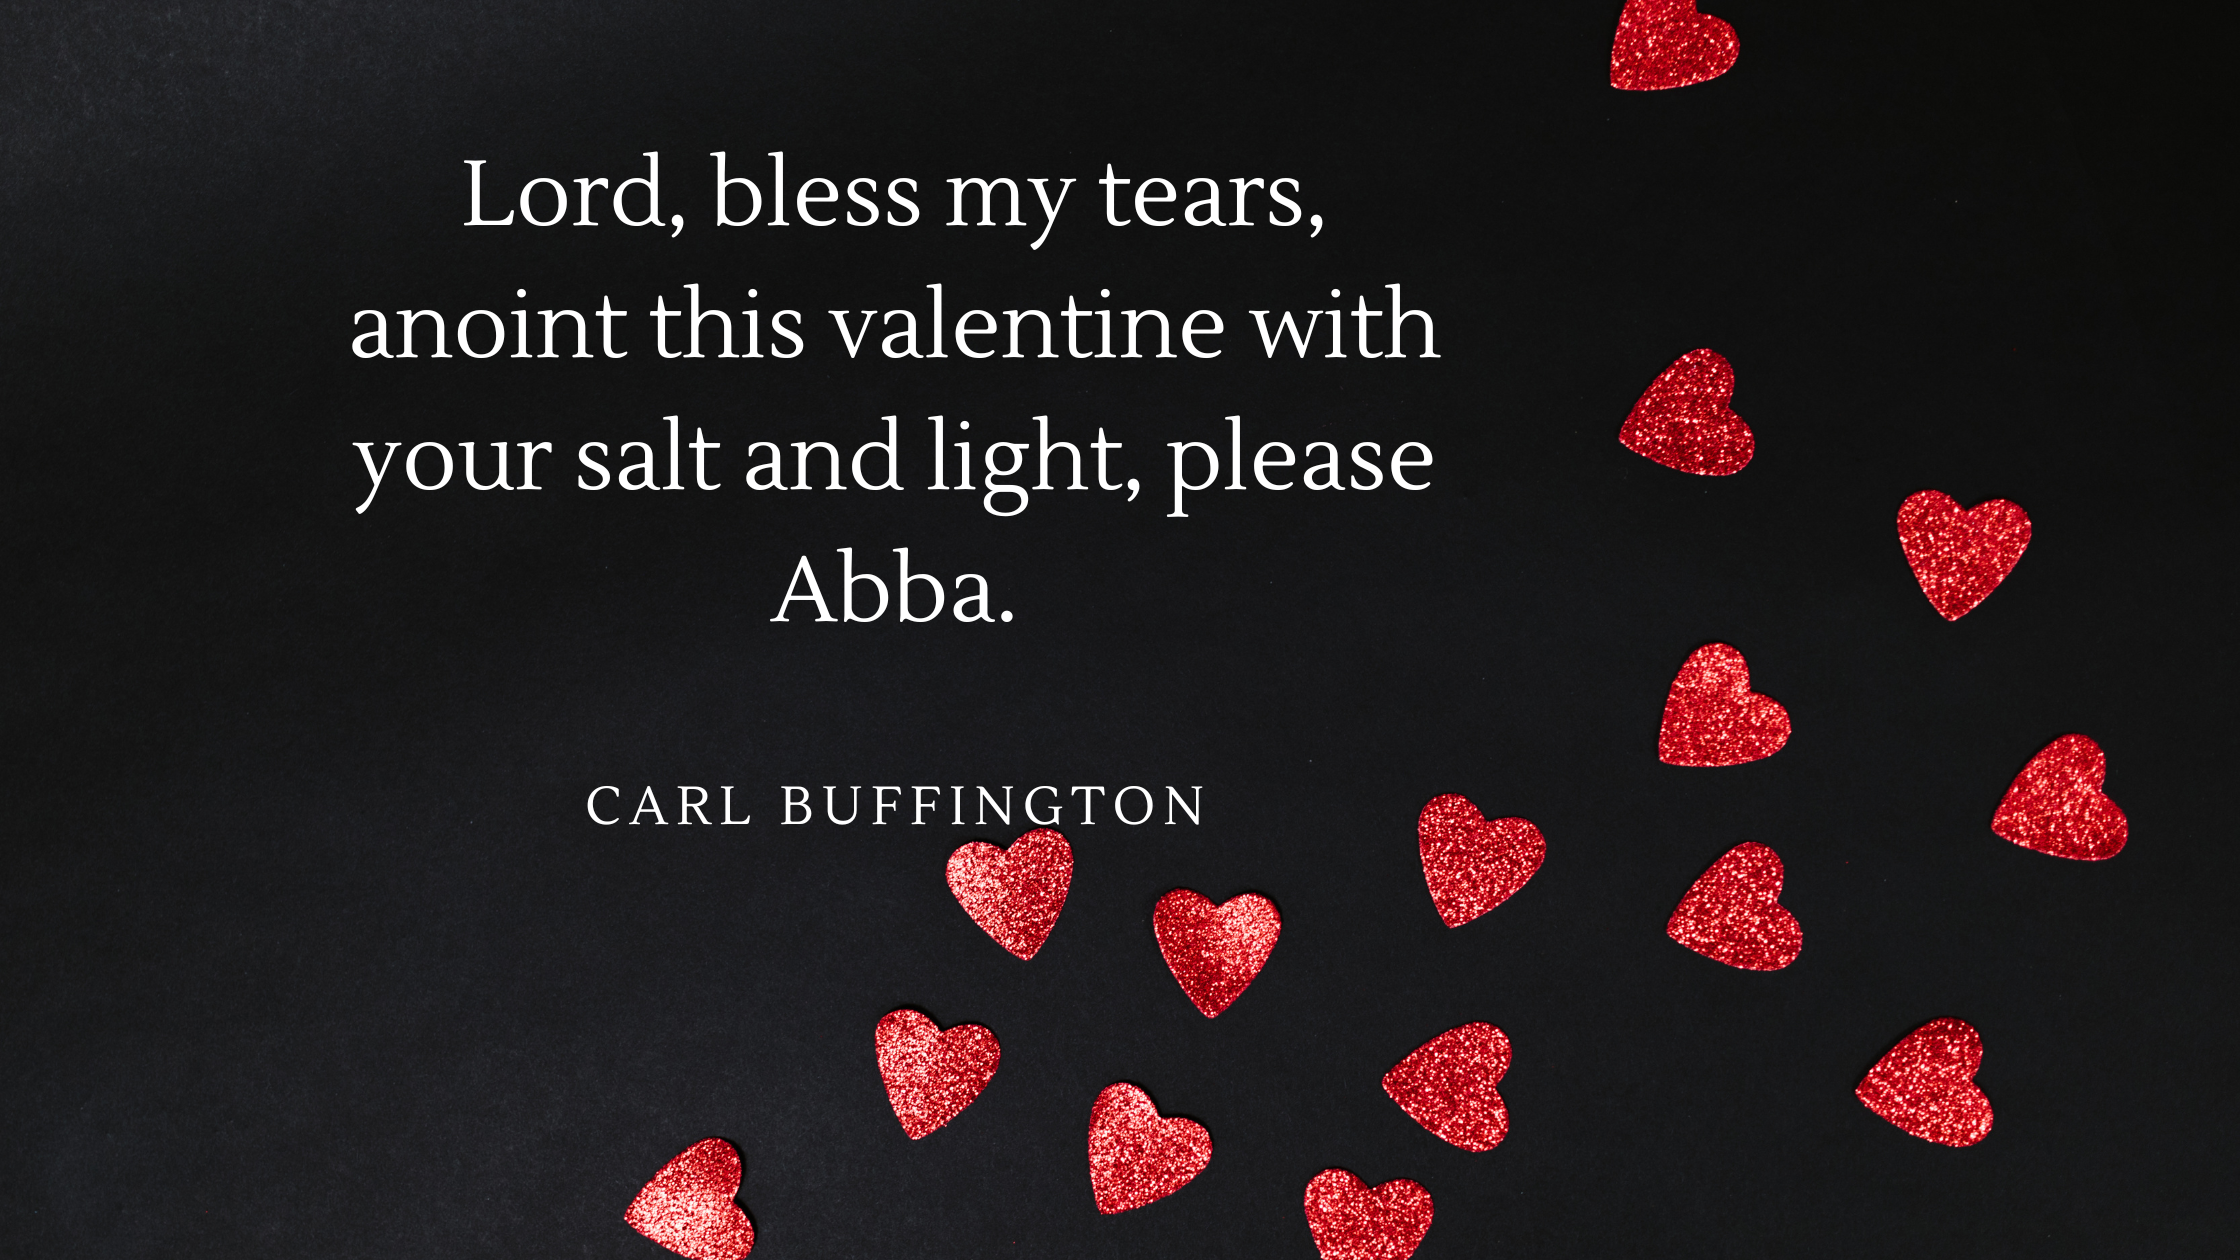 Lord, bless my tears, anoint this valentine with your salt and light, please Abba.